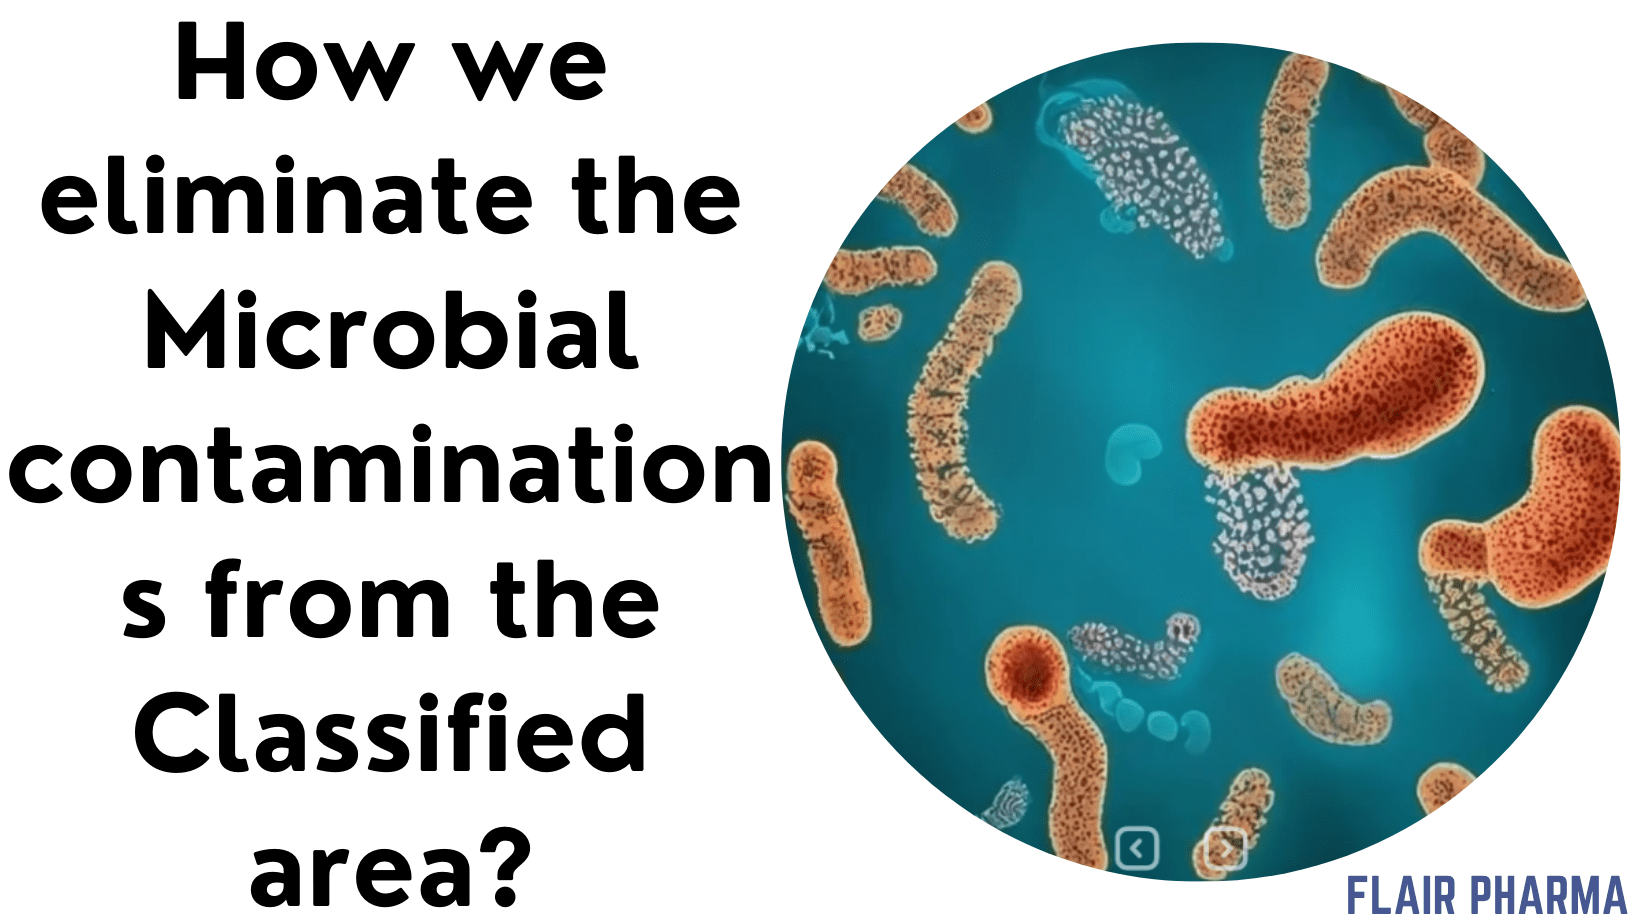 How we eliminate the Microbial contaminations from the Classified area